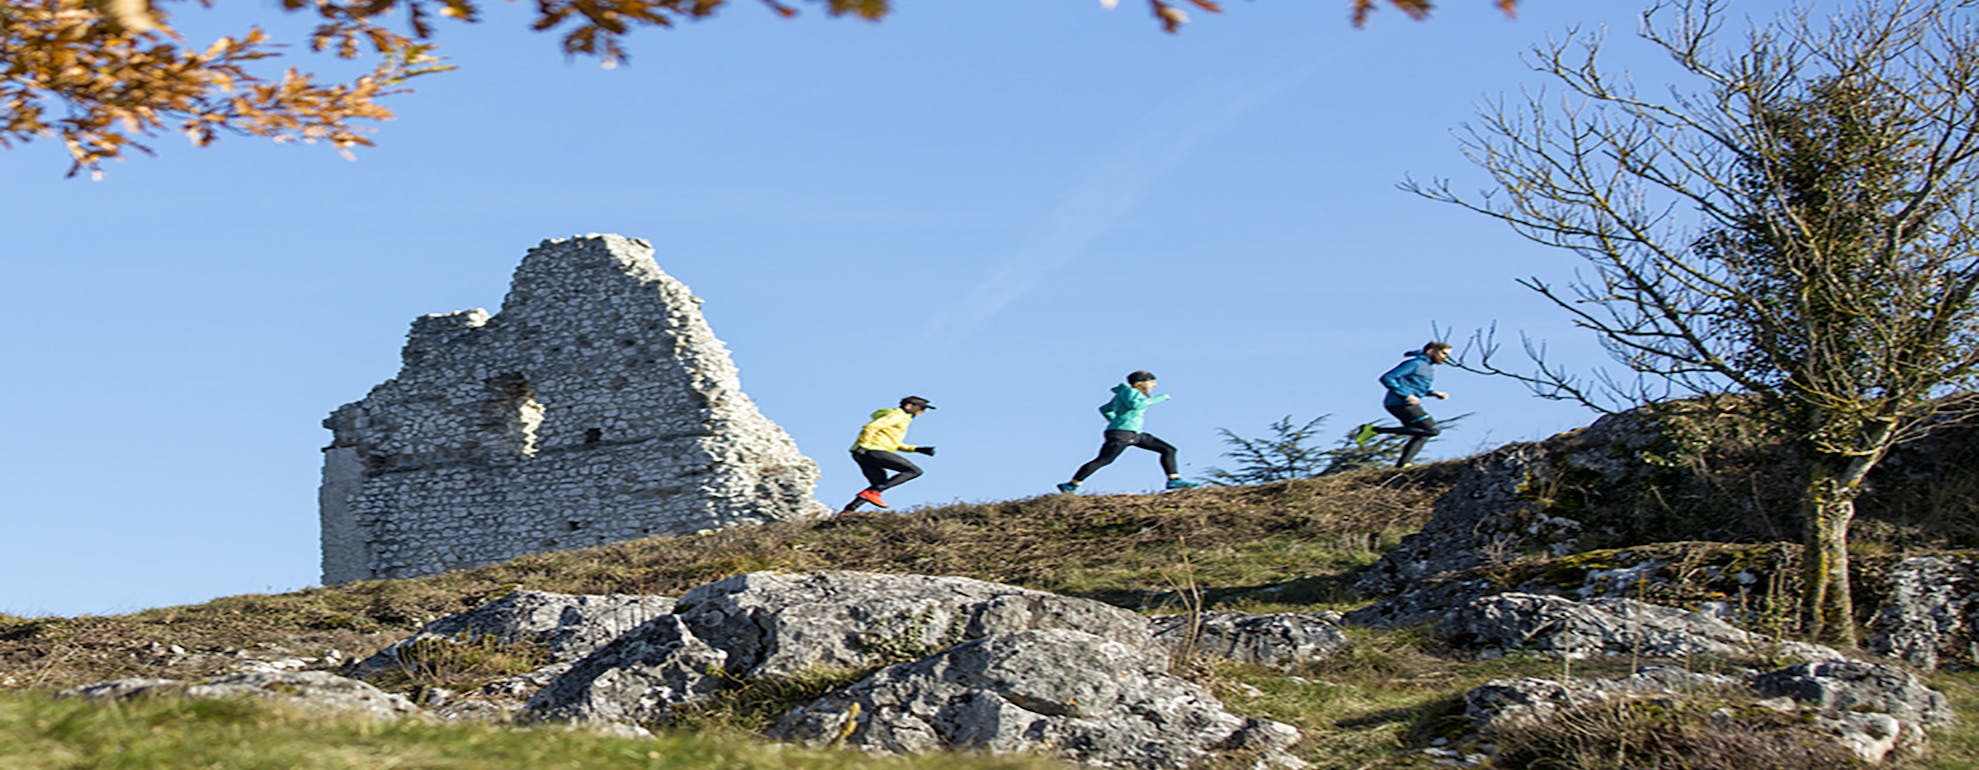 benefits-of-trail-running-in-groups